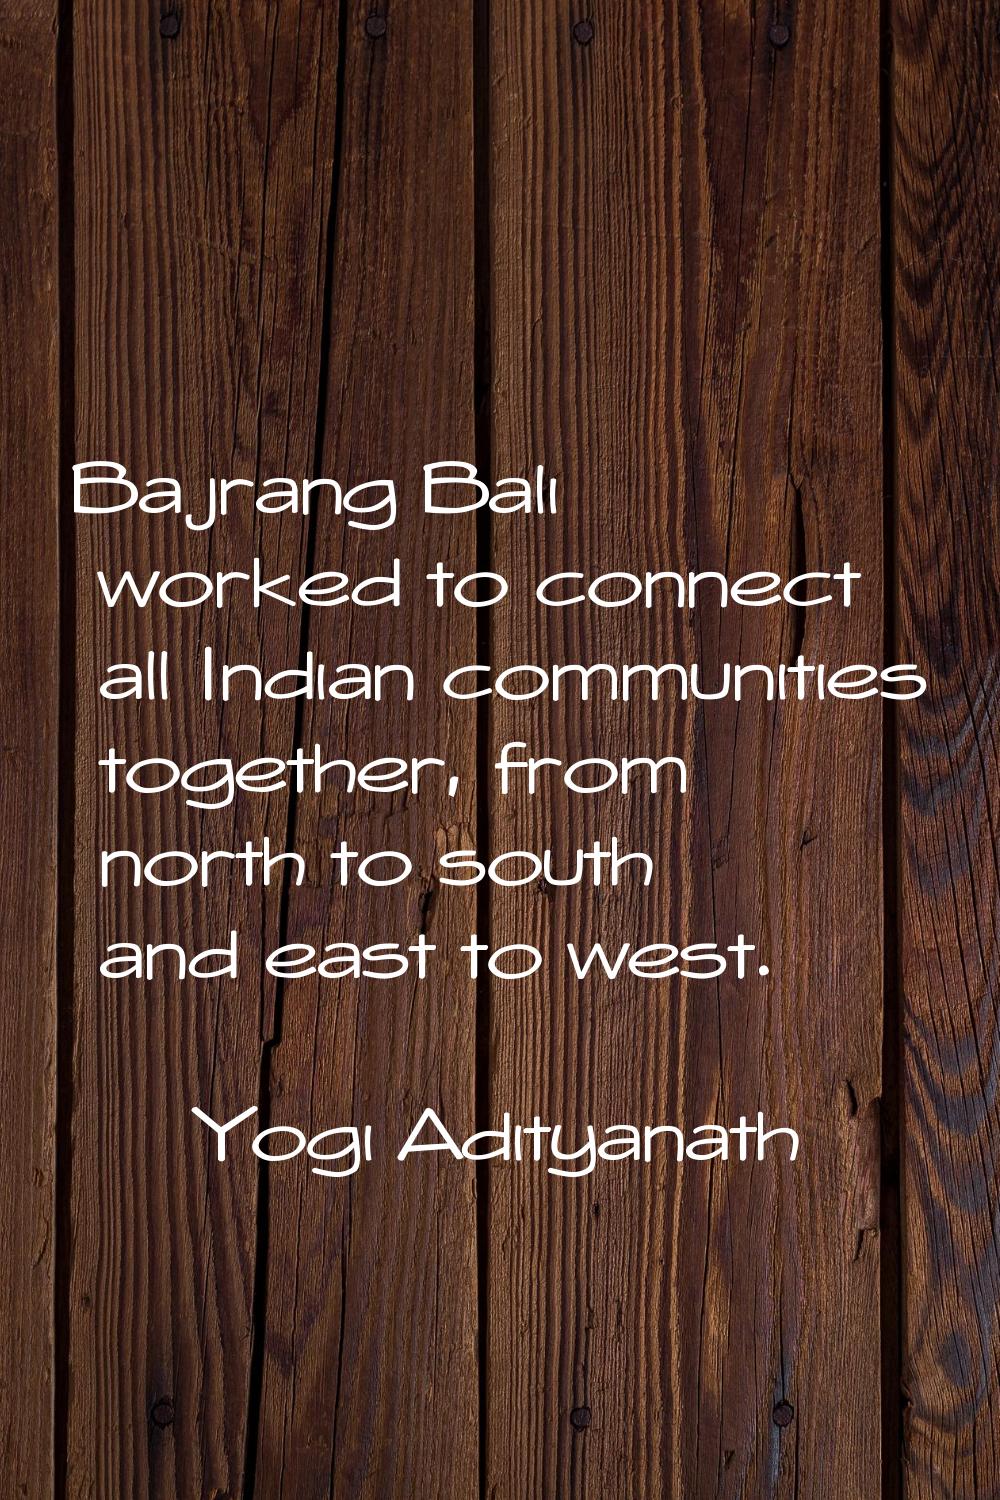 Bajrang Bali worked to connect all Indian communities together, from north to south and east to wes